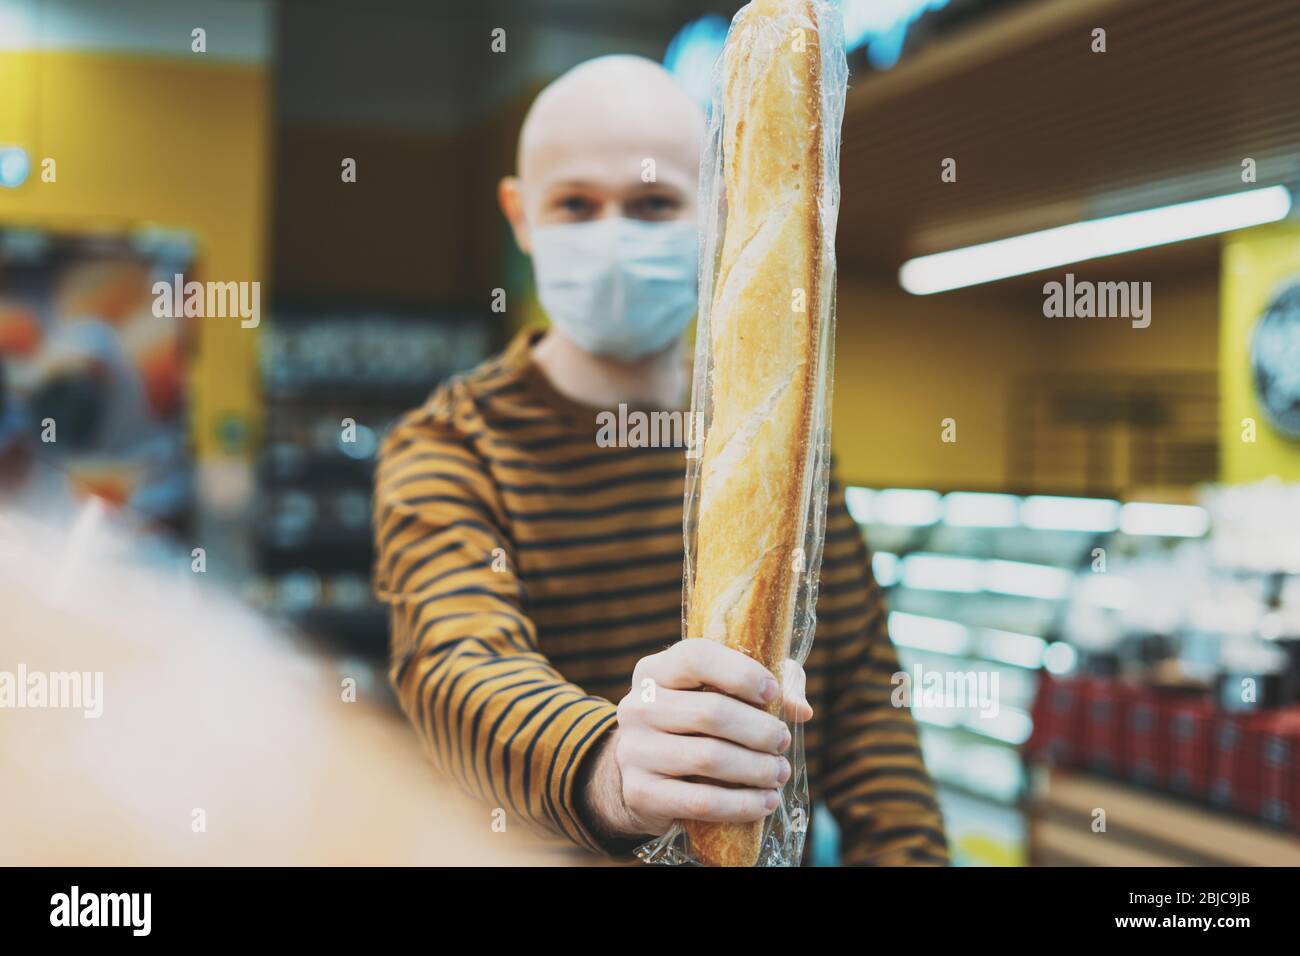 Funny Adult Bald Man In Medical Face Mask With Bread In The